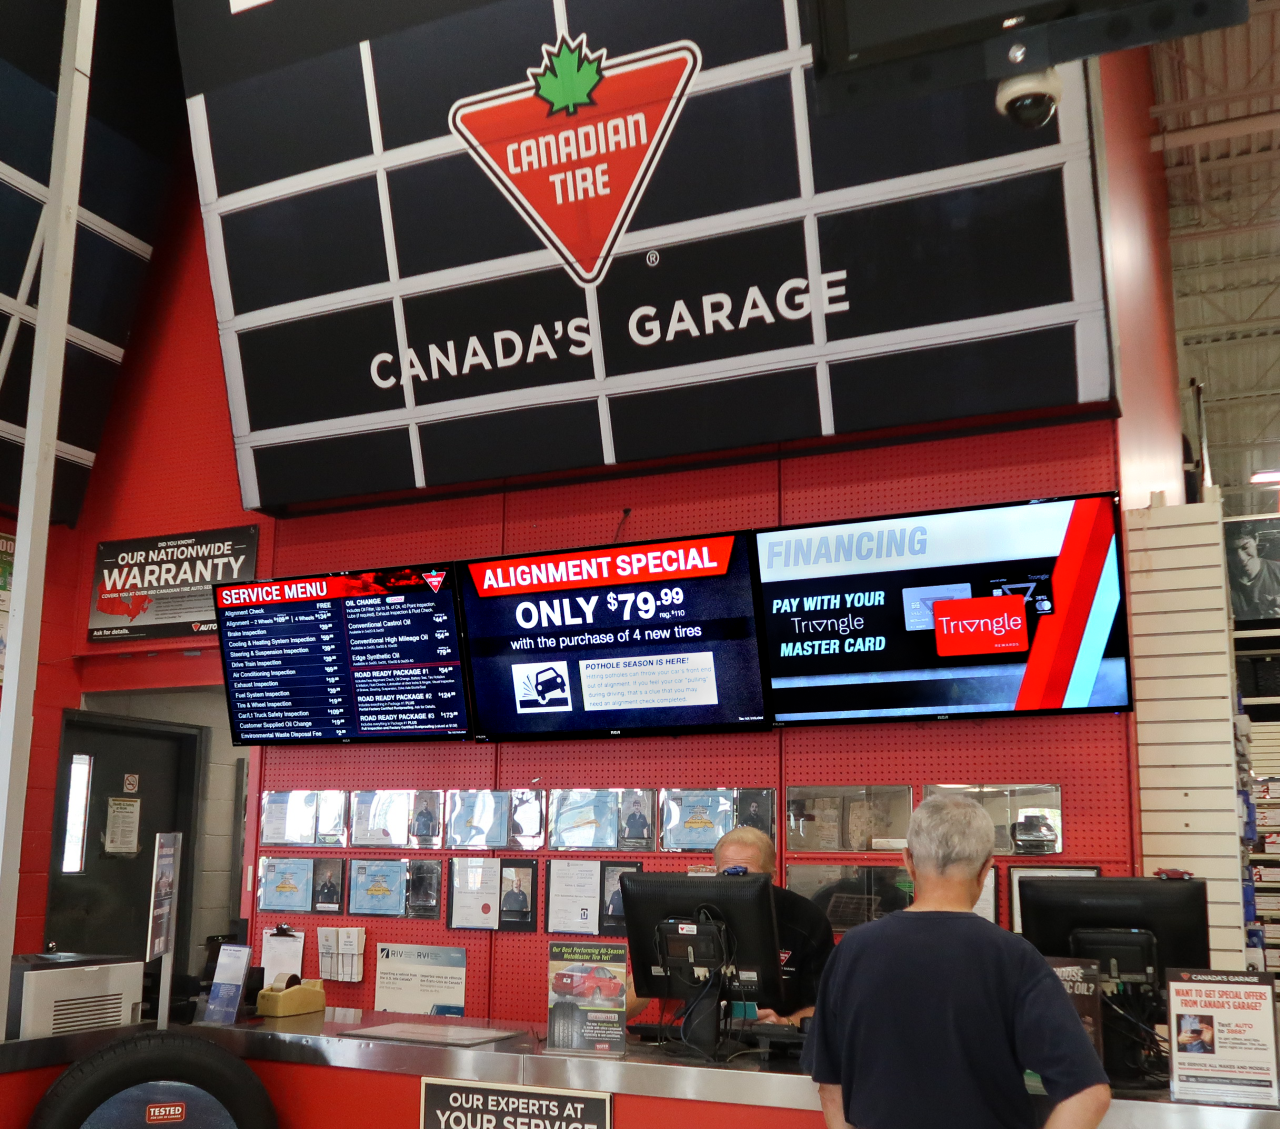 Digital Signage installed at Canadian Tire